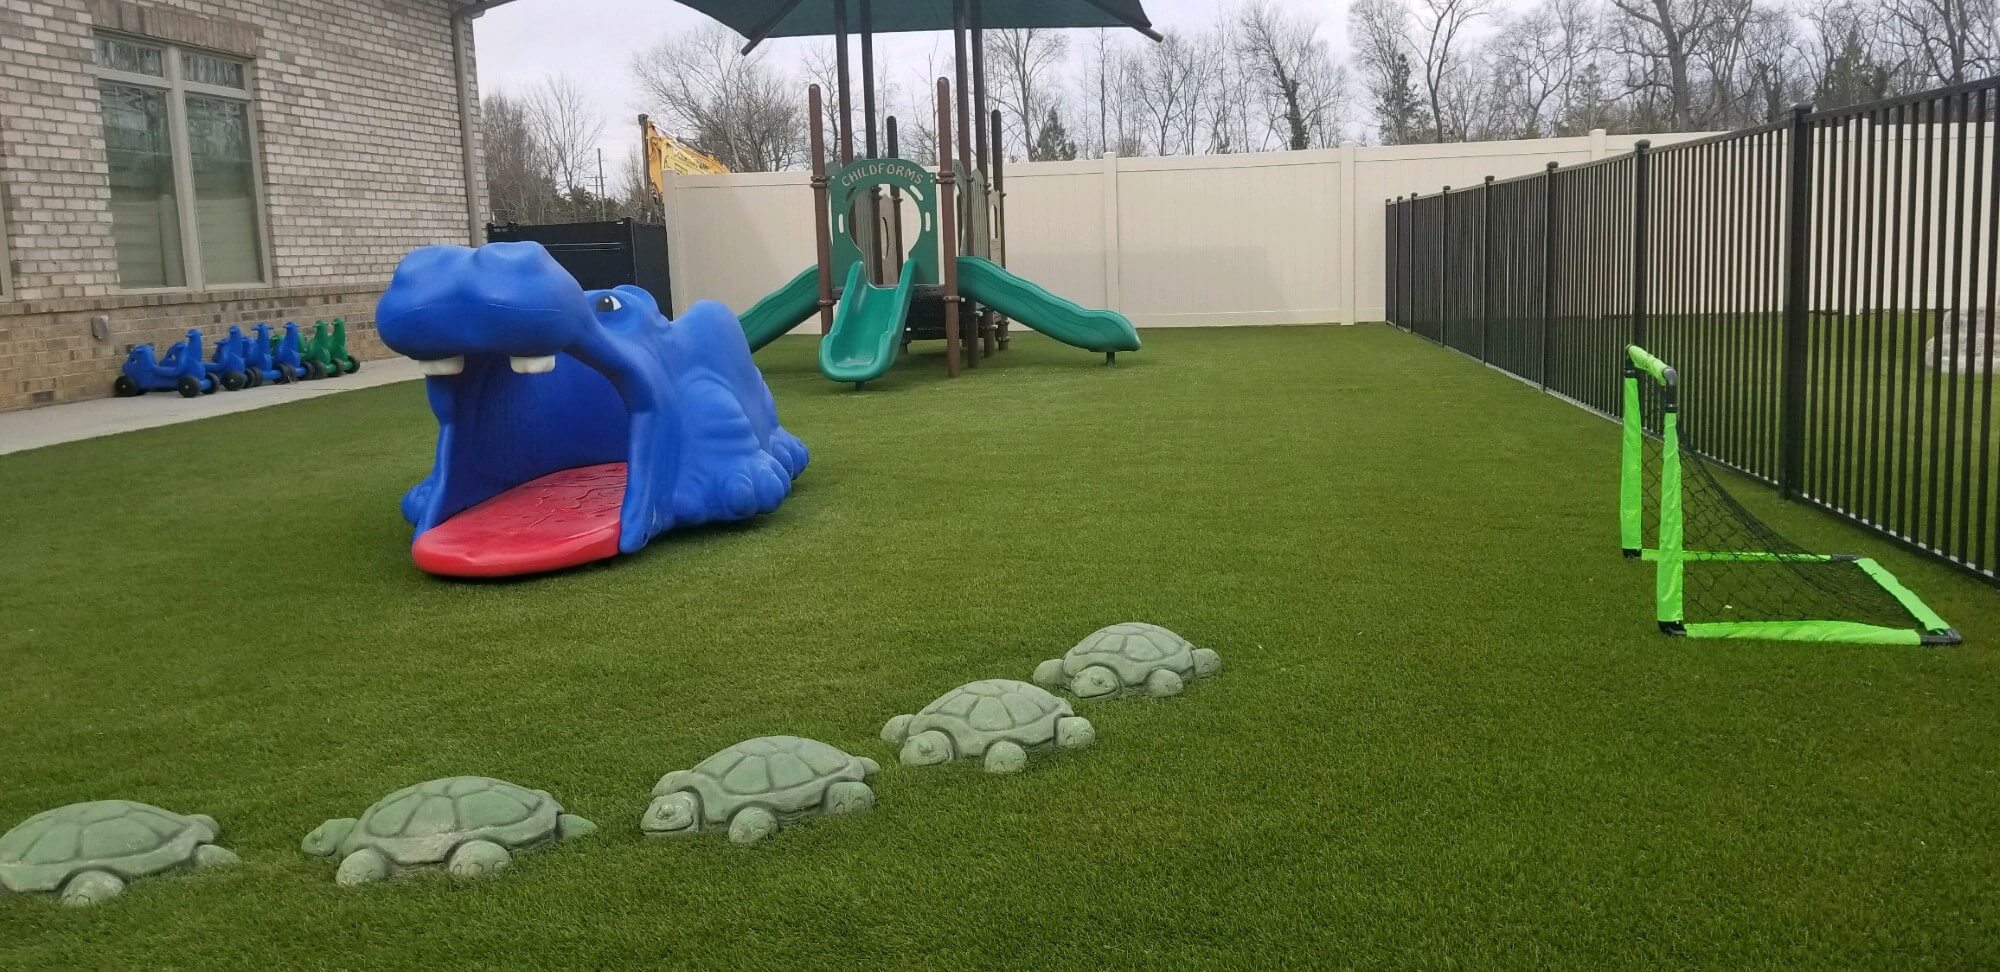 Artificial playground grass at daycare